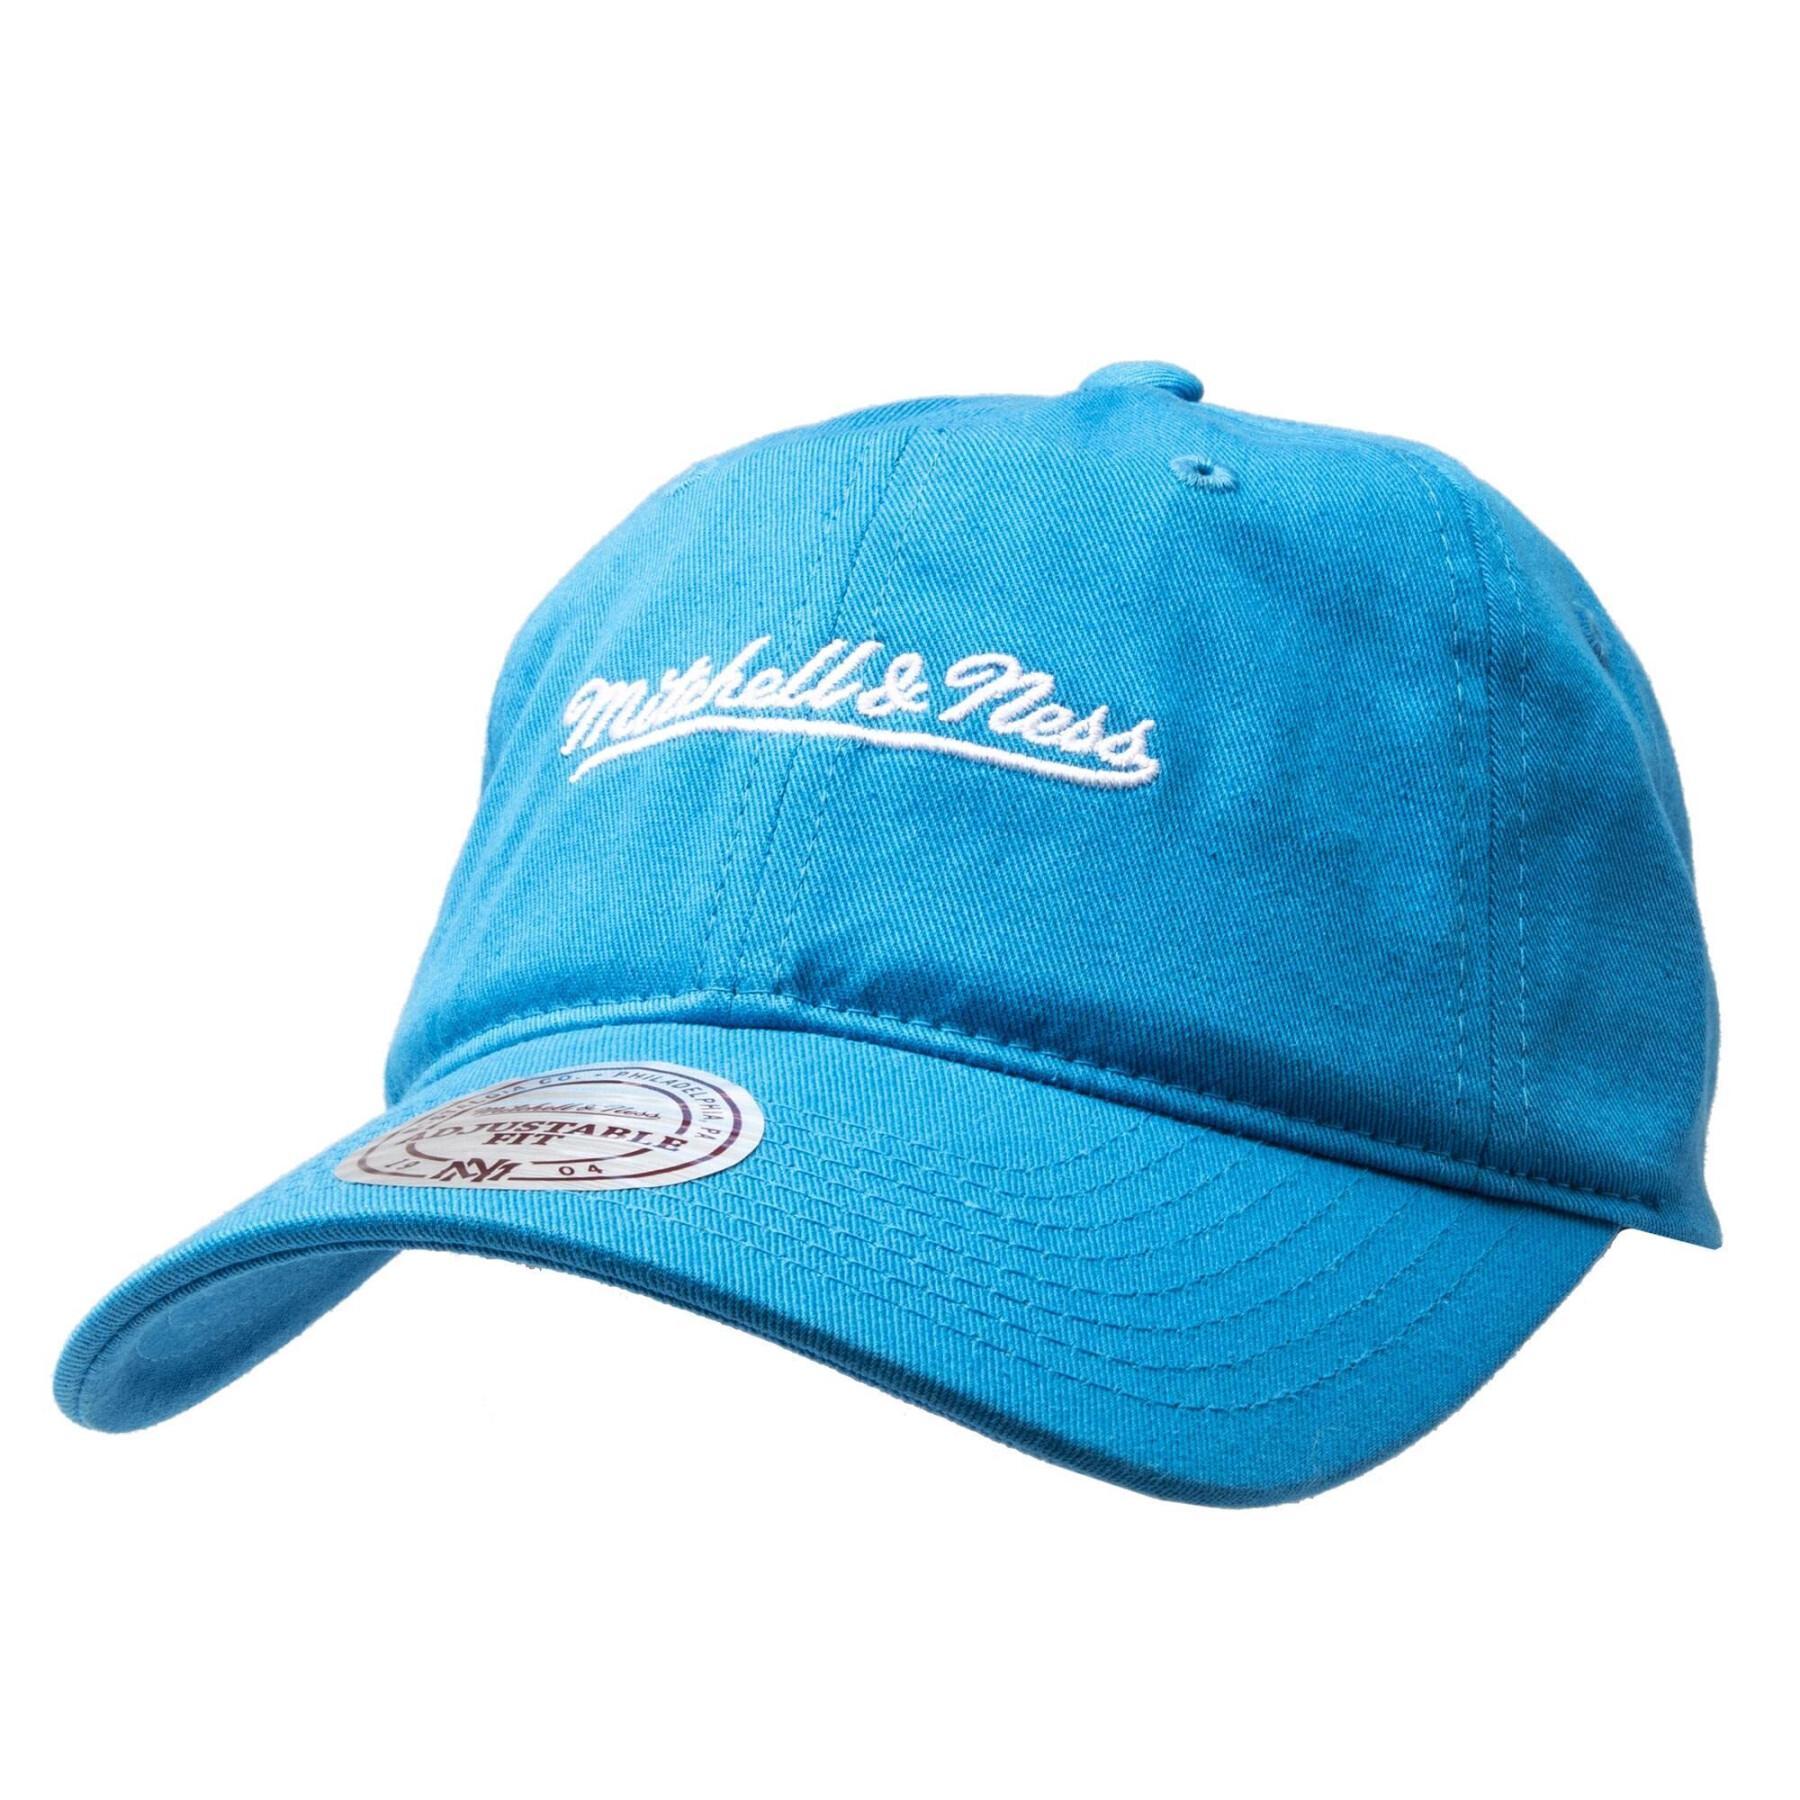 Boné Mitchell & Ness washed cotton dad